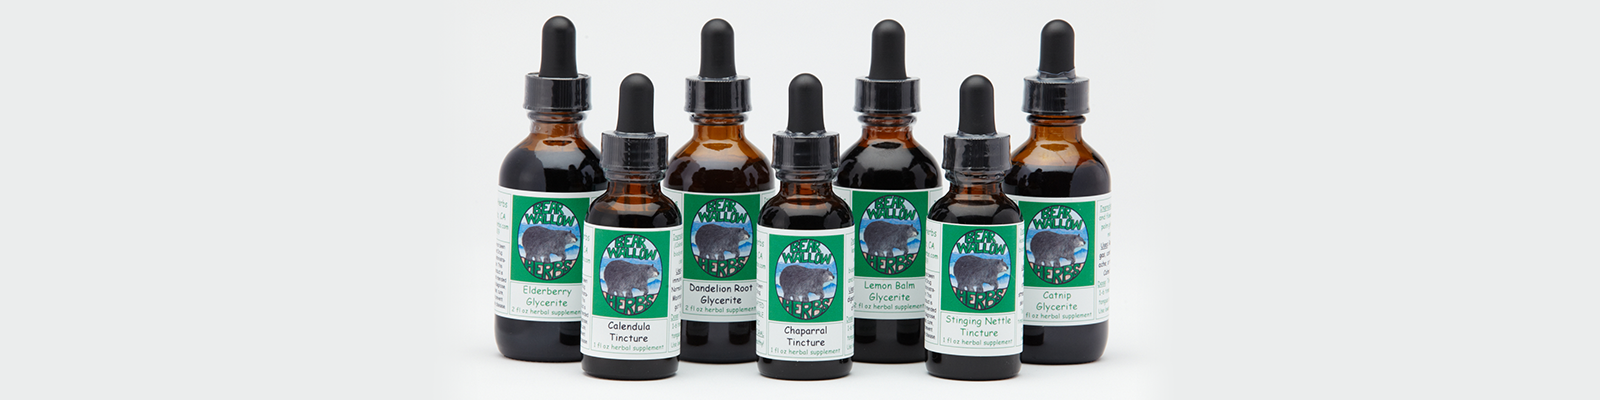 Image of tinctures